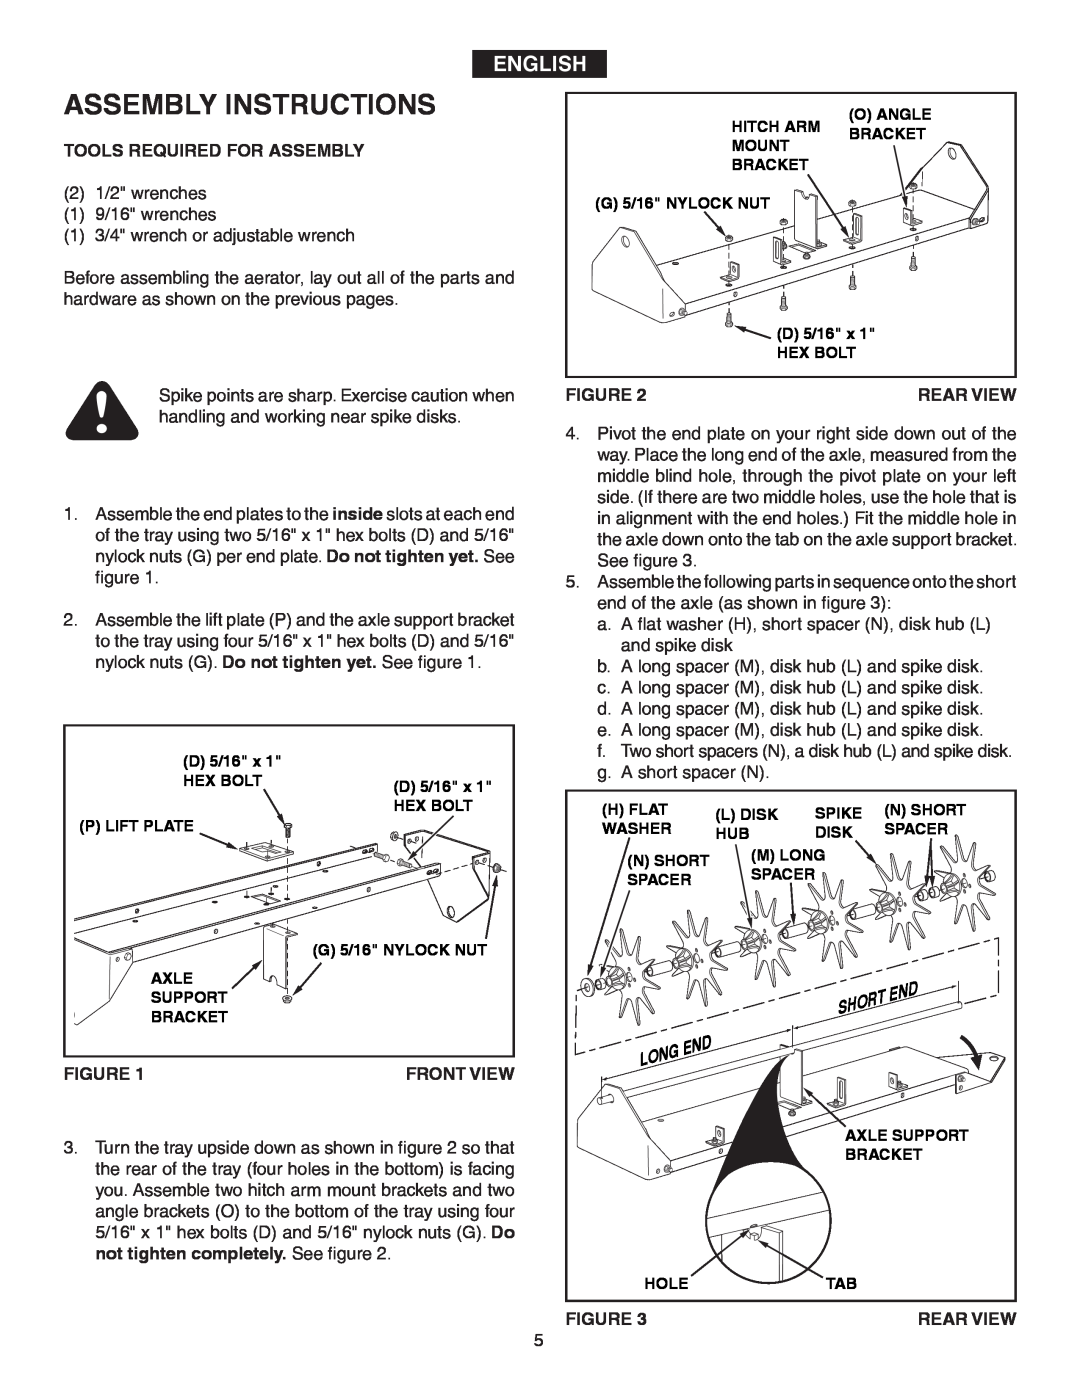 Agri-Fab 45-0346 owner manual Assembly Instructions, English, Tools Required For Assembly, Front View, Rear View 